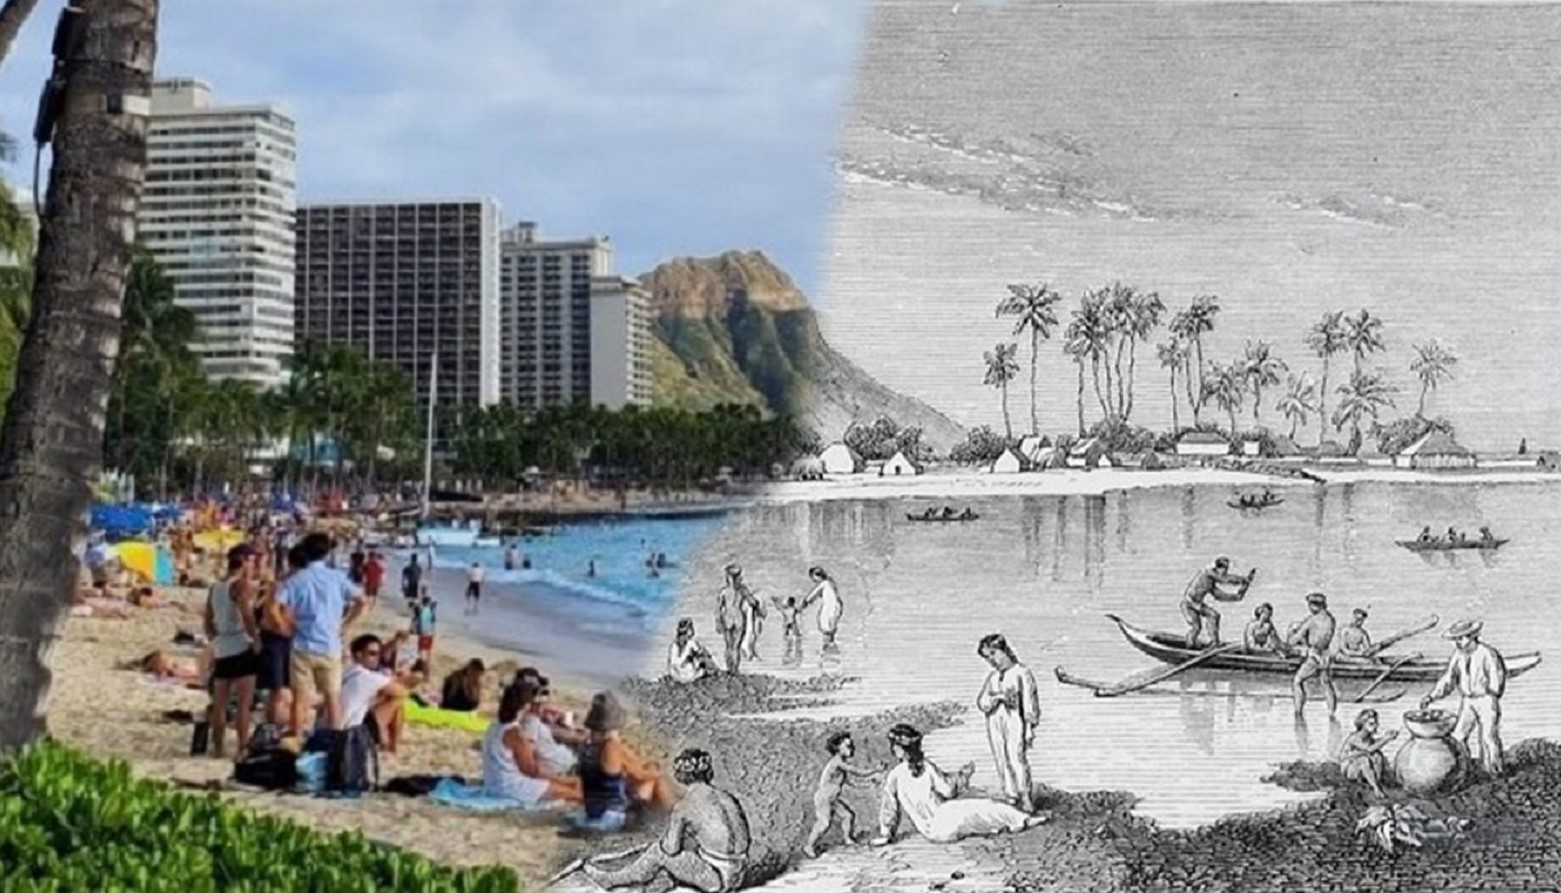 Blended pictures of old and modern Waikiki Bay